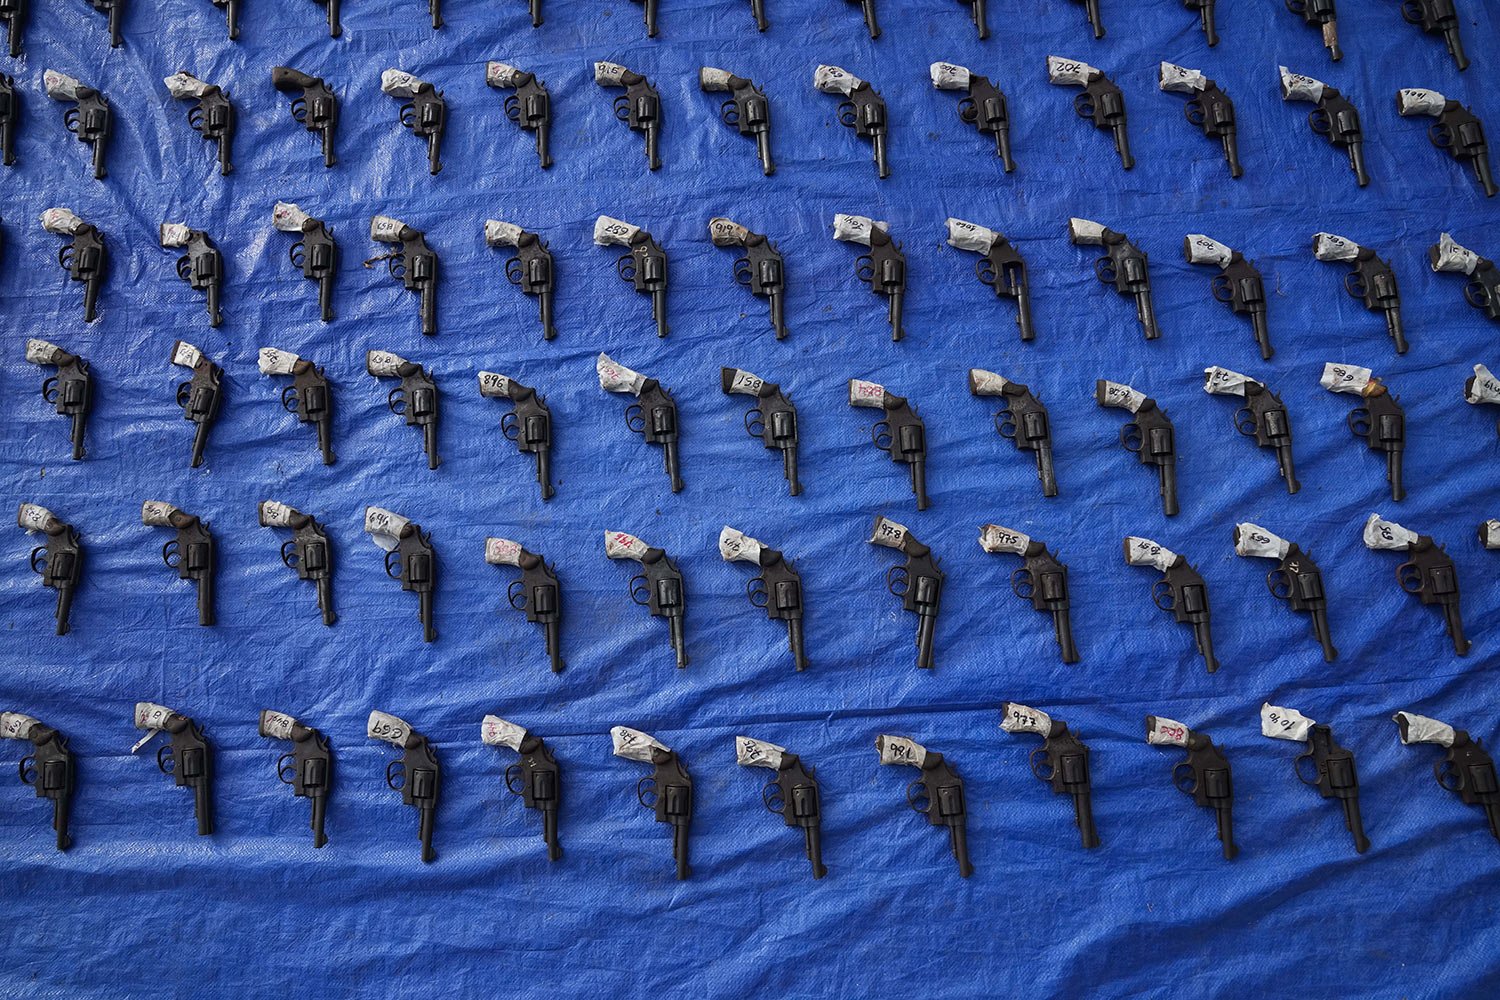  Seized pistols are presented to the media before they are set to be destroyed at police headquarters in Panama City, Friday, Aug. 26, 2022. (AP Photo/Arnulfo Franco) 